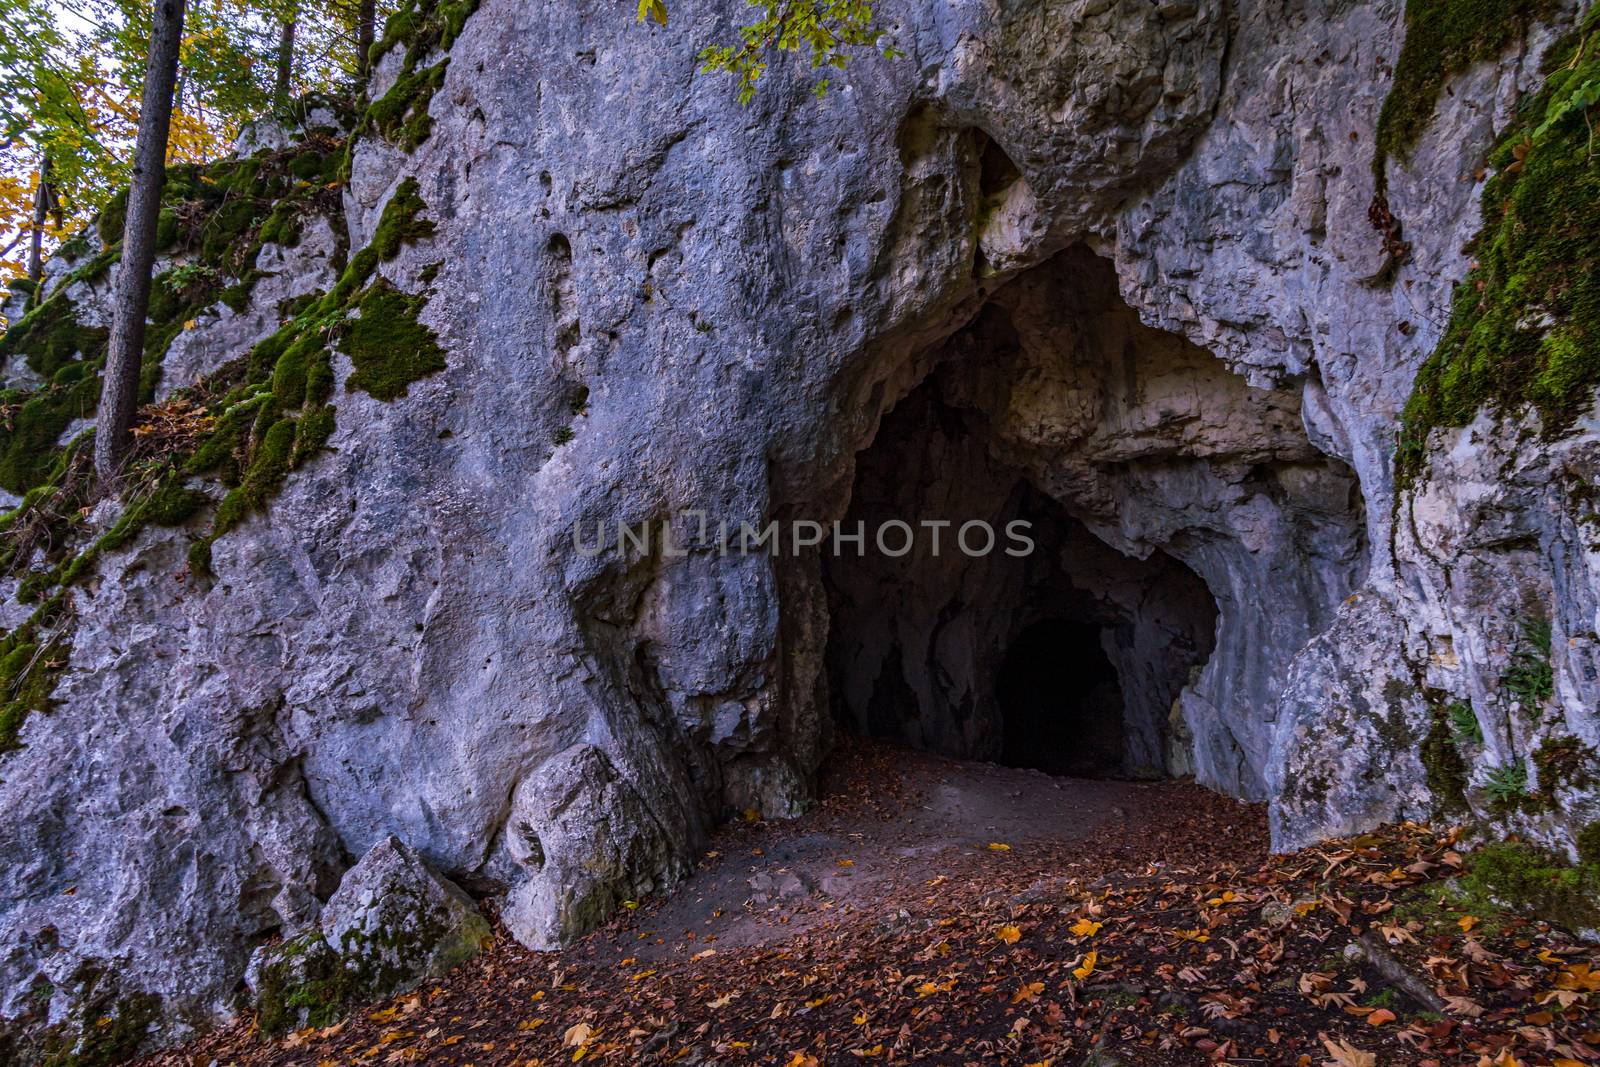 The Sperberloch at the Jagerhaus a cave in the Danube valley near Beuron by mindscapephotos